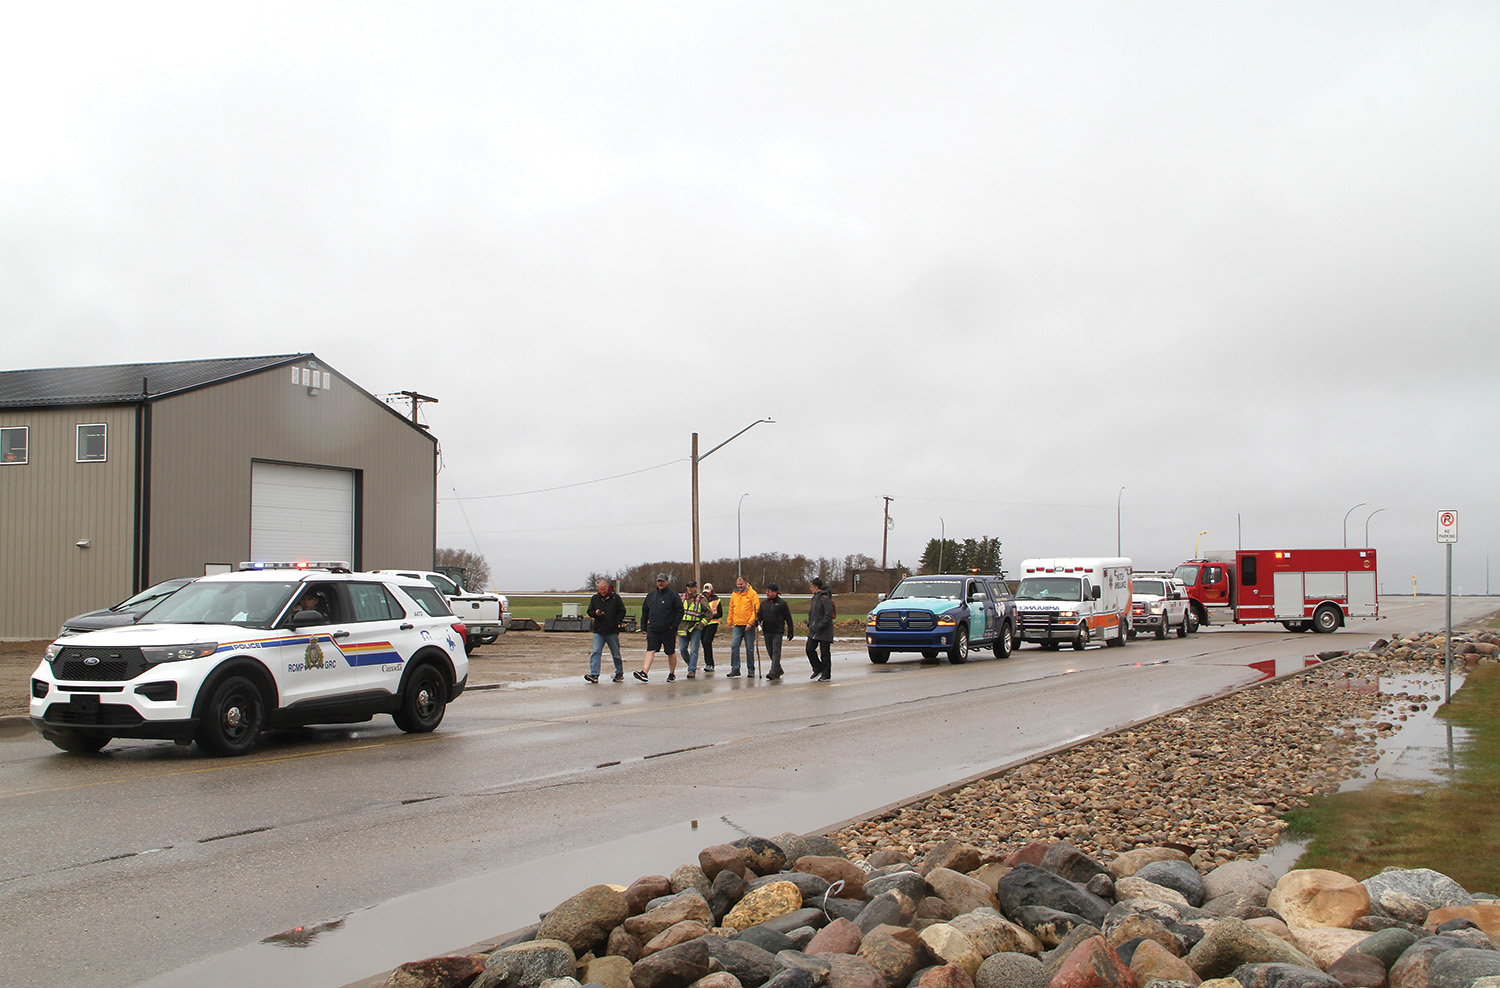 Moosomin’s RCMP, Ambulance, and Fire Truck welcomed Chad Kennedy to town on his walk for PTSD awareness.